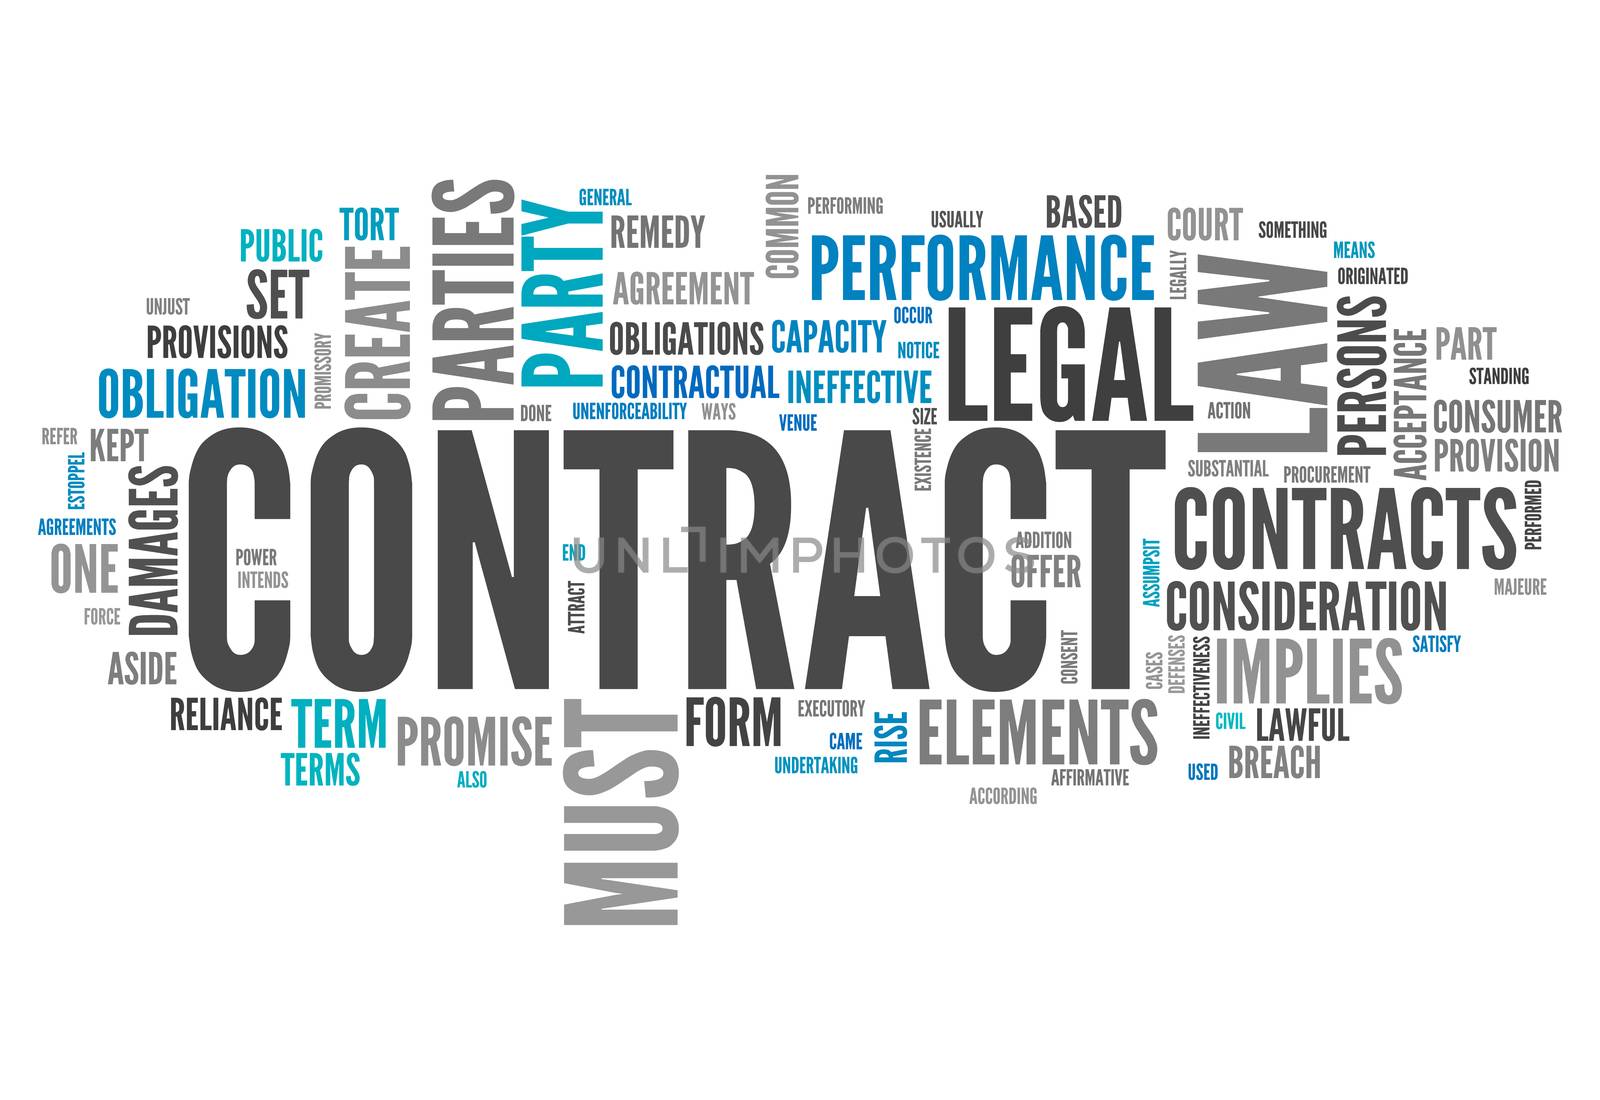 Word Cloud with Contract related tags